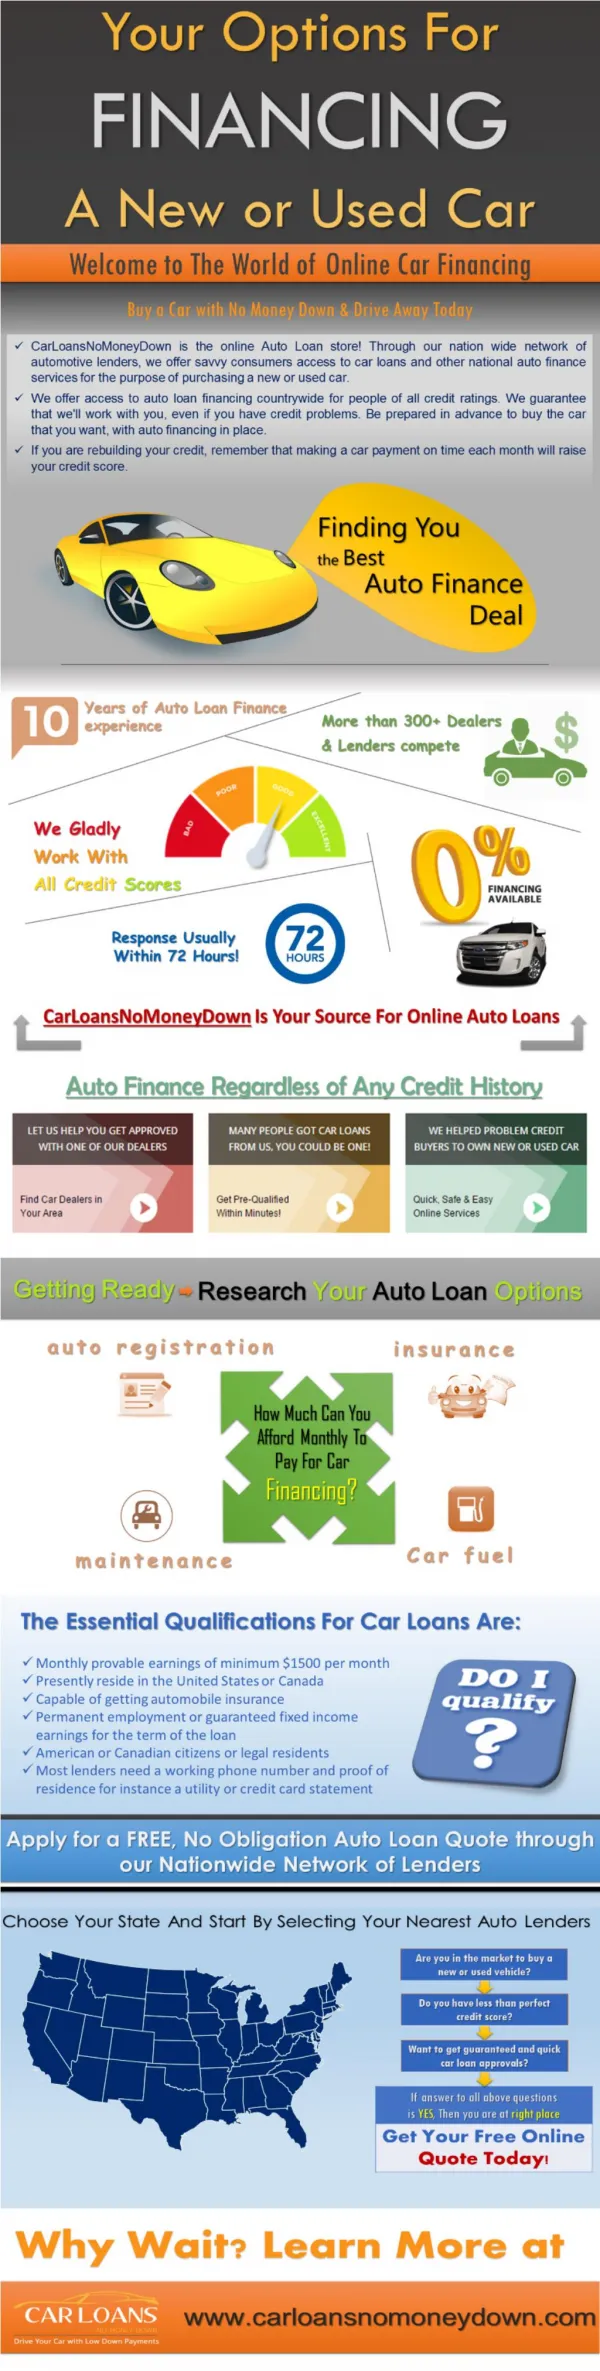 Auto loan options for financing a new or used car